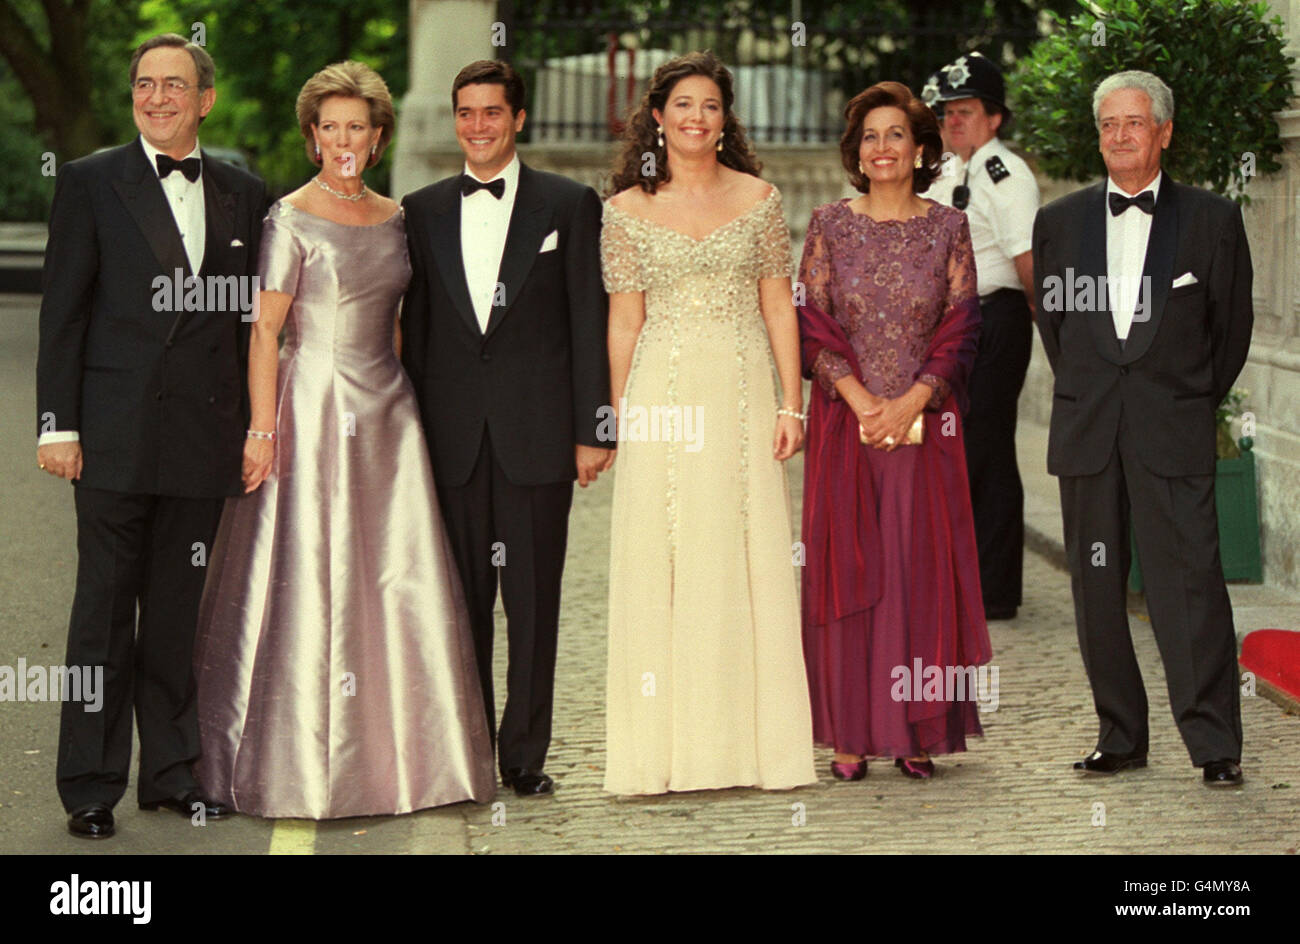 Princess Alexia, daughter of King Constantine, the former King of Greece and her fiance Carlos Morales Quintana arrive with their parents for a gala ball before their wedding on Friday 9 July 1999. * From left: King Constantine and Queen Anne-Marie, Carlos Morales Quintana, Princess Alexia, Mrs Maria Teresa Quintana and Mr Luis Miguel Morales. Stock Photo